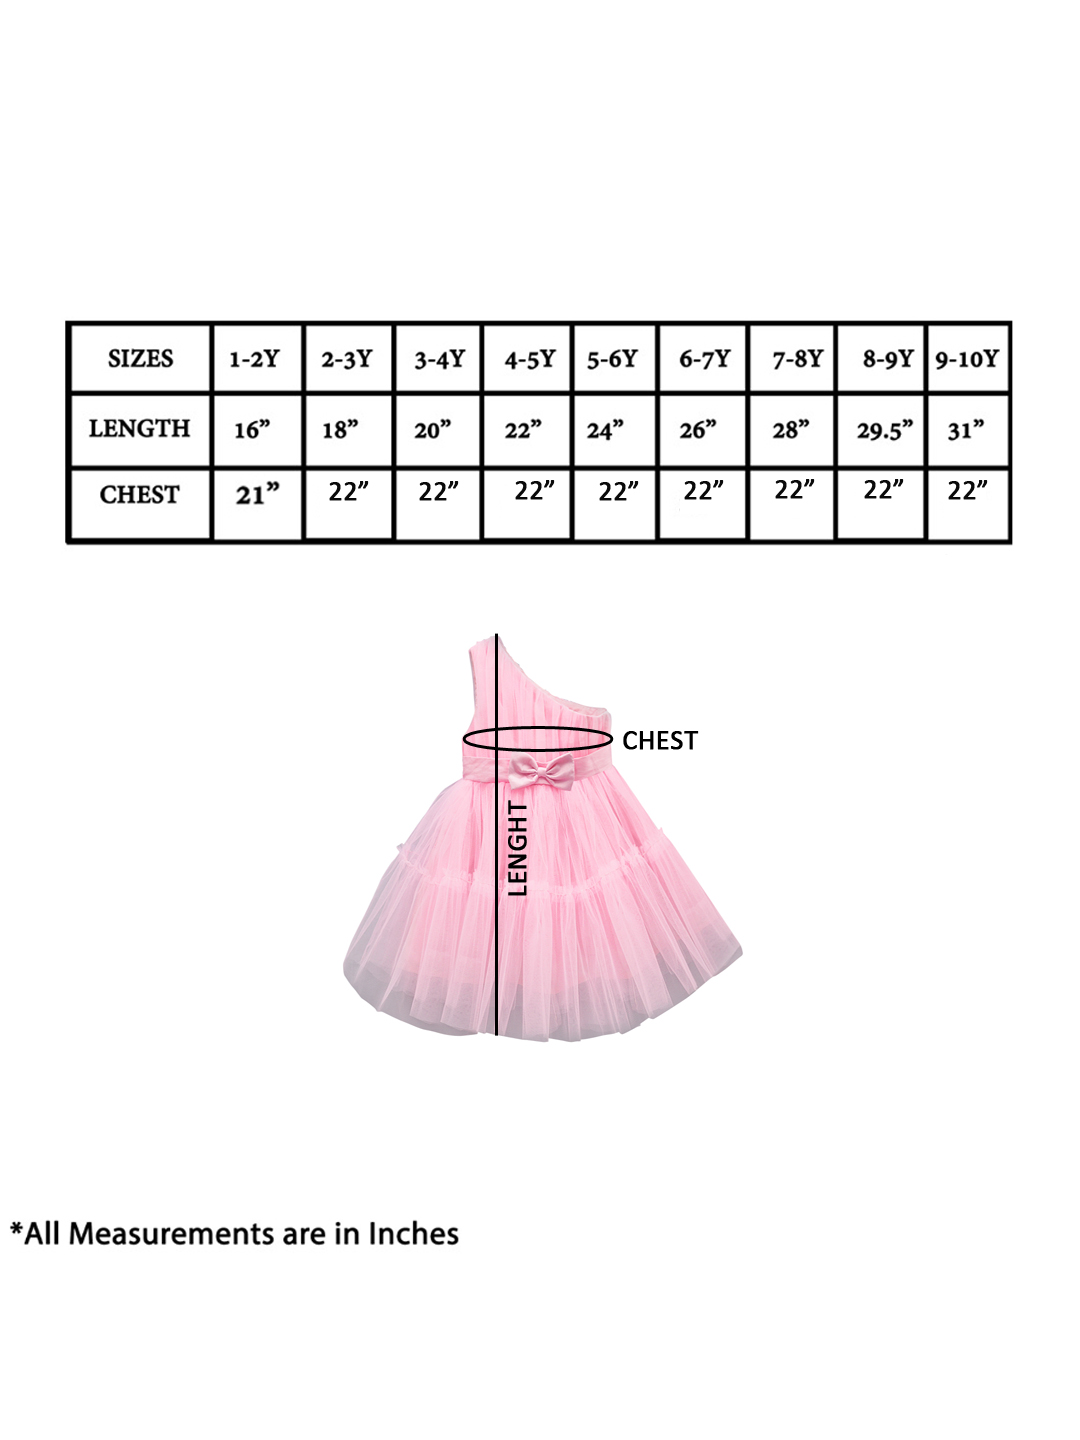 Ladies Size Chart Dress in PDF - Download | Template.net